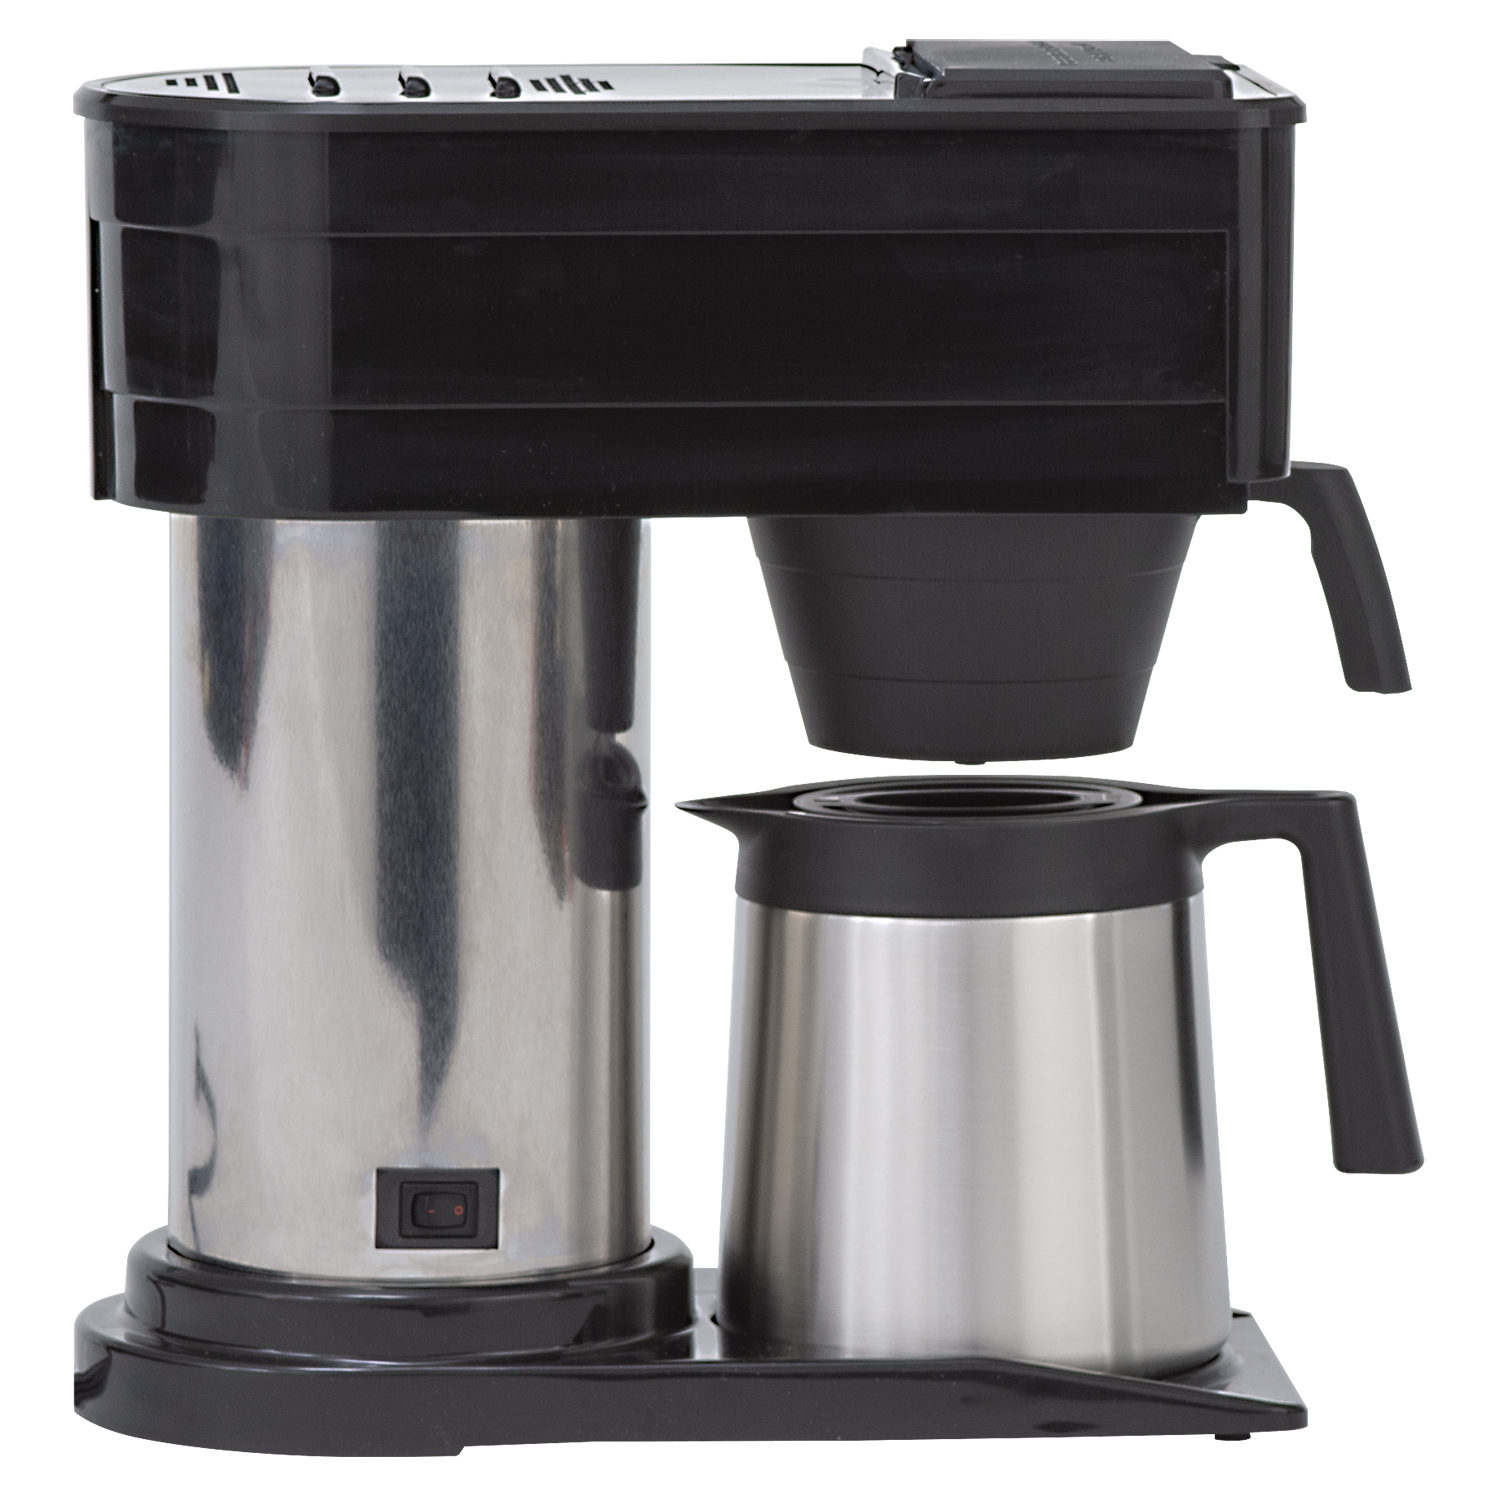 BUNN, BTX 10 Cup Black Thermal Coffee Maker (Condition: New) - image 4 of 5